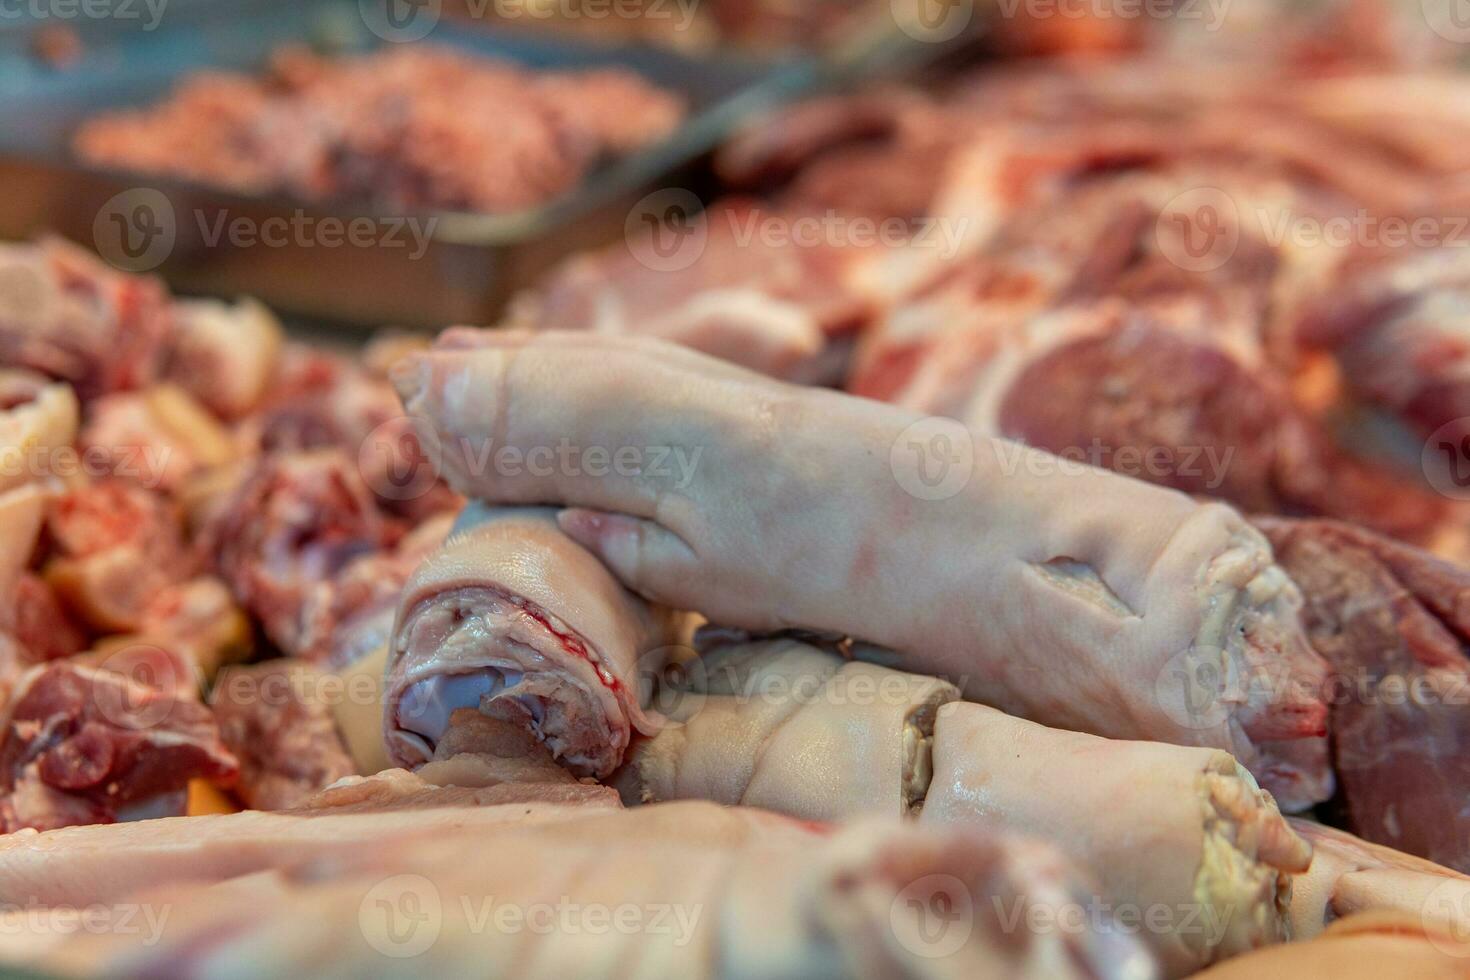 Pig Hooves for sale at meat market in Northern Thailand photo